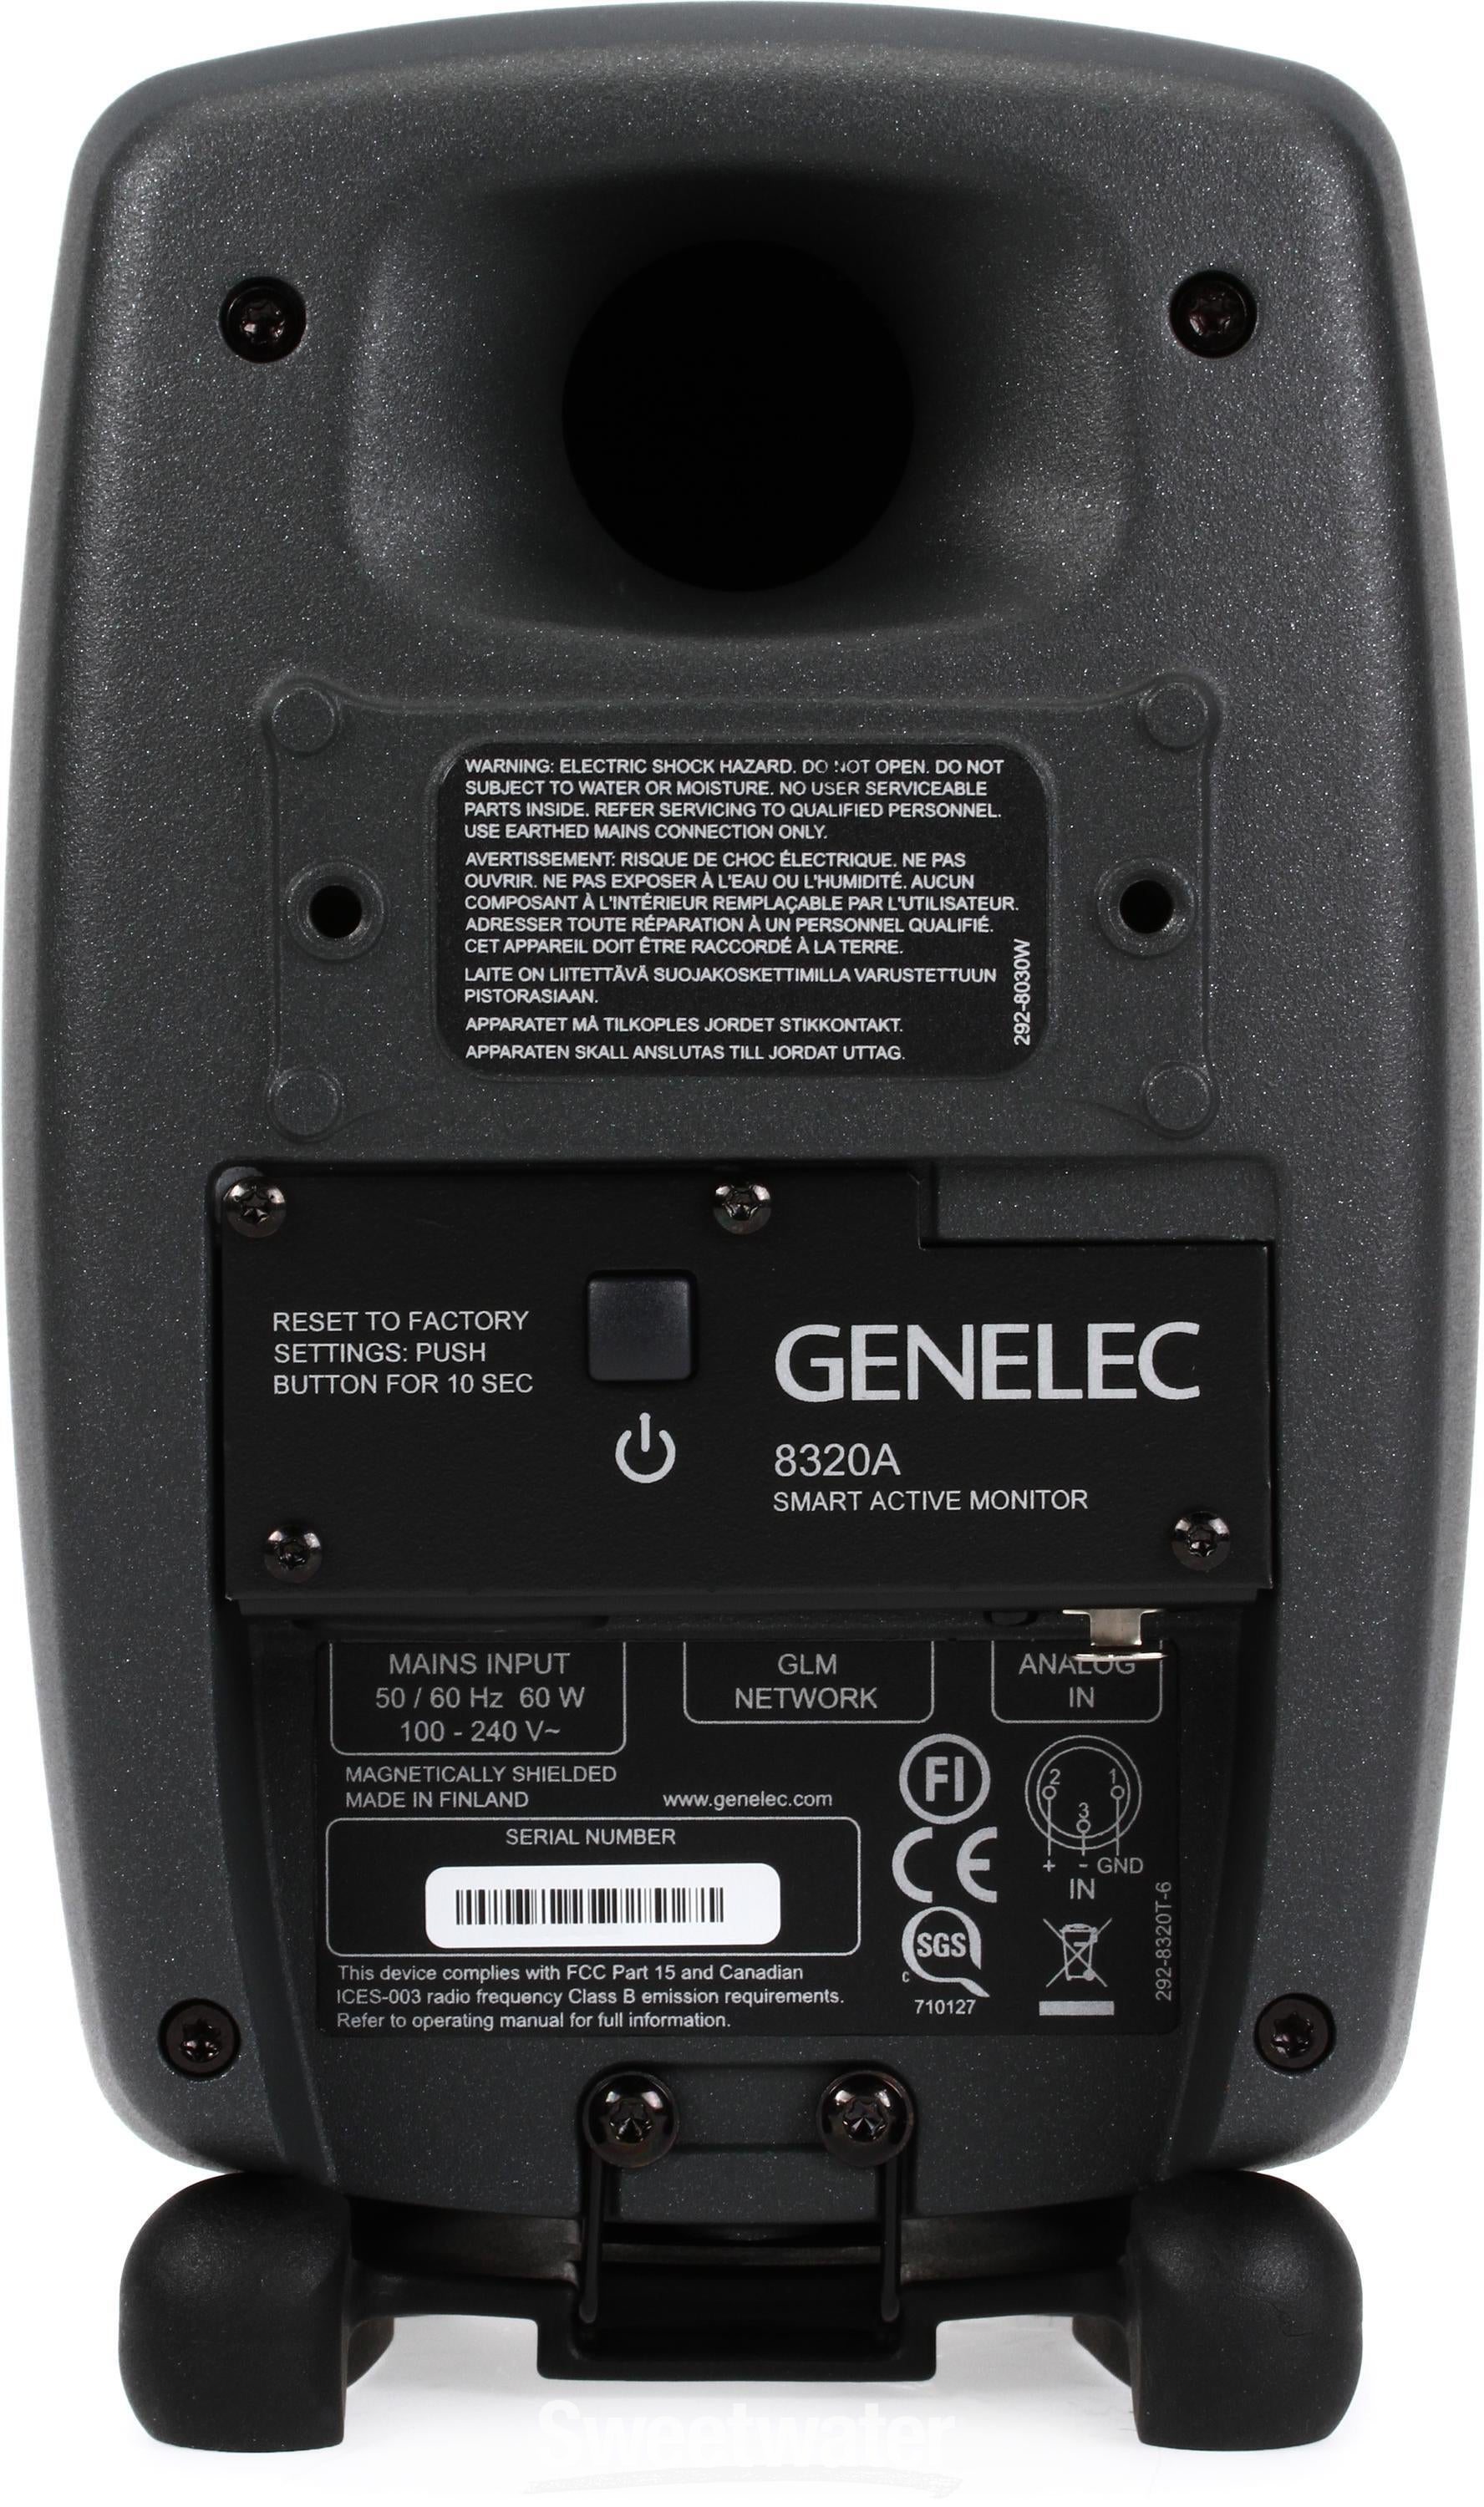 Genelec 8320A 4 inch Powered Studio Monitor | Sweetwater